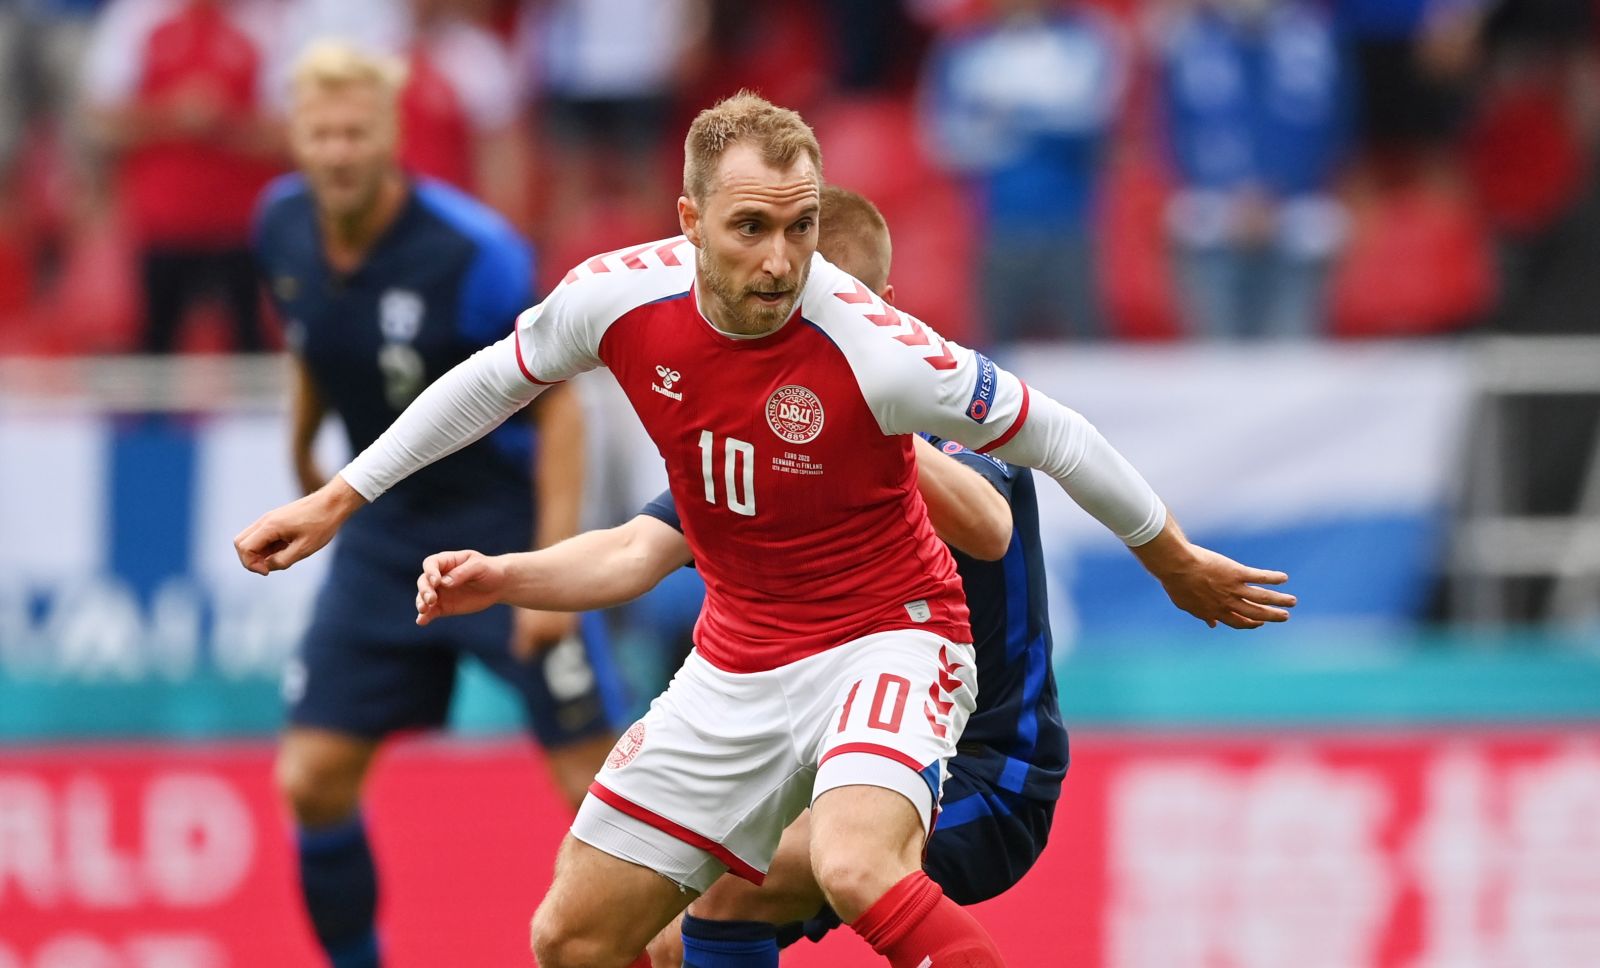 epa09265254 Christian Eriksen of Denmark in action during the UEFA EURO 2020 group B preliminary round soccer match between Denmark and Finland in Copenhagen, Denmark, 12 June 2021.  EPA/Stuart Franklin / POOL (RESTRICTIONS: For editorial news reporting purposes only. Images must appear as still images and must not emulate match action video footage. Photographs published in online publications shall have an interval of at least 20 seconds between the posting.)